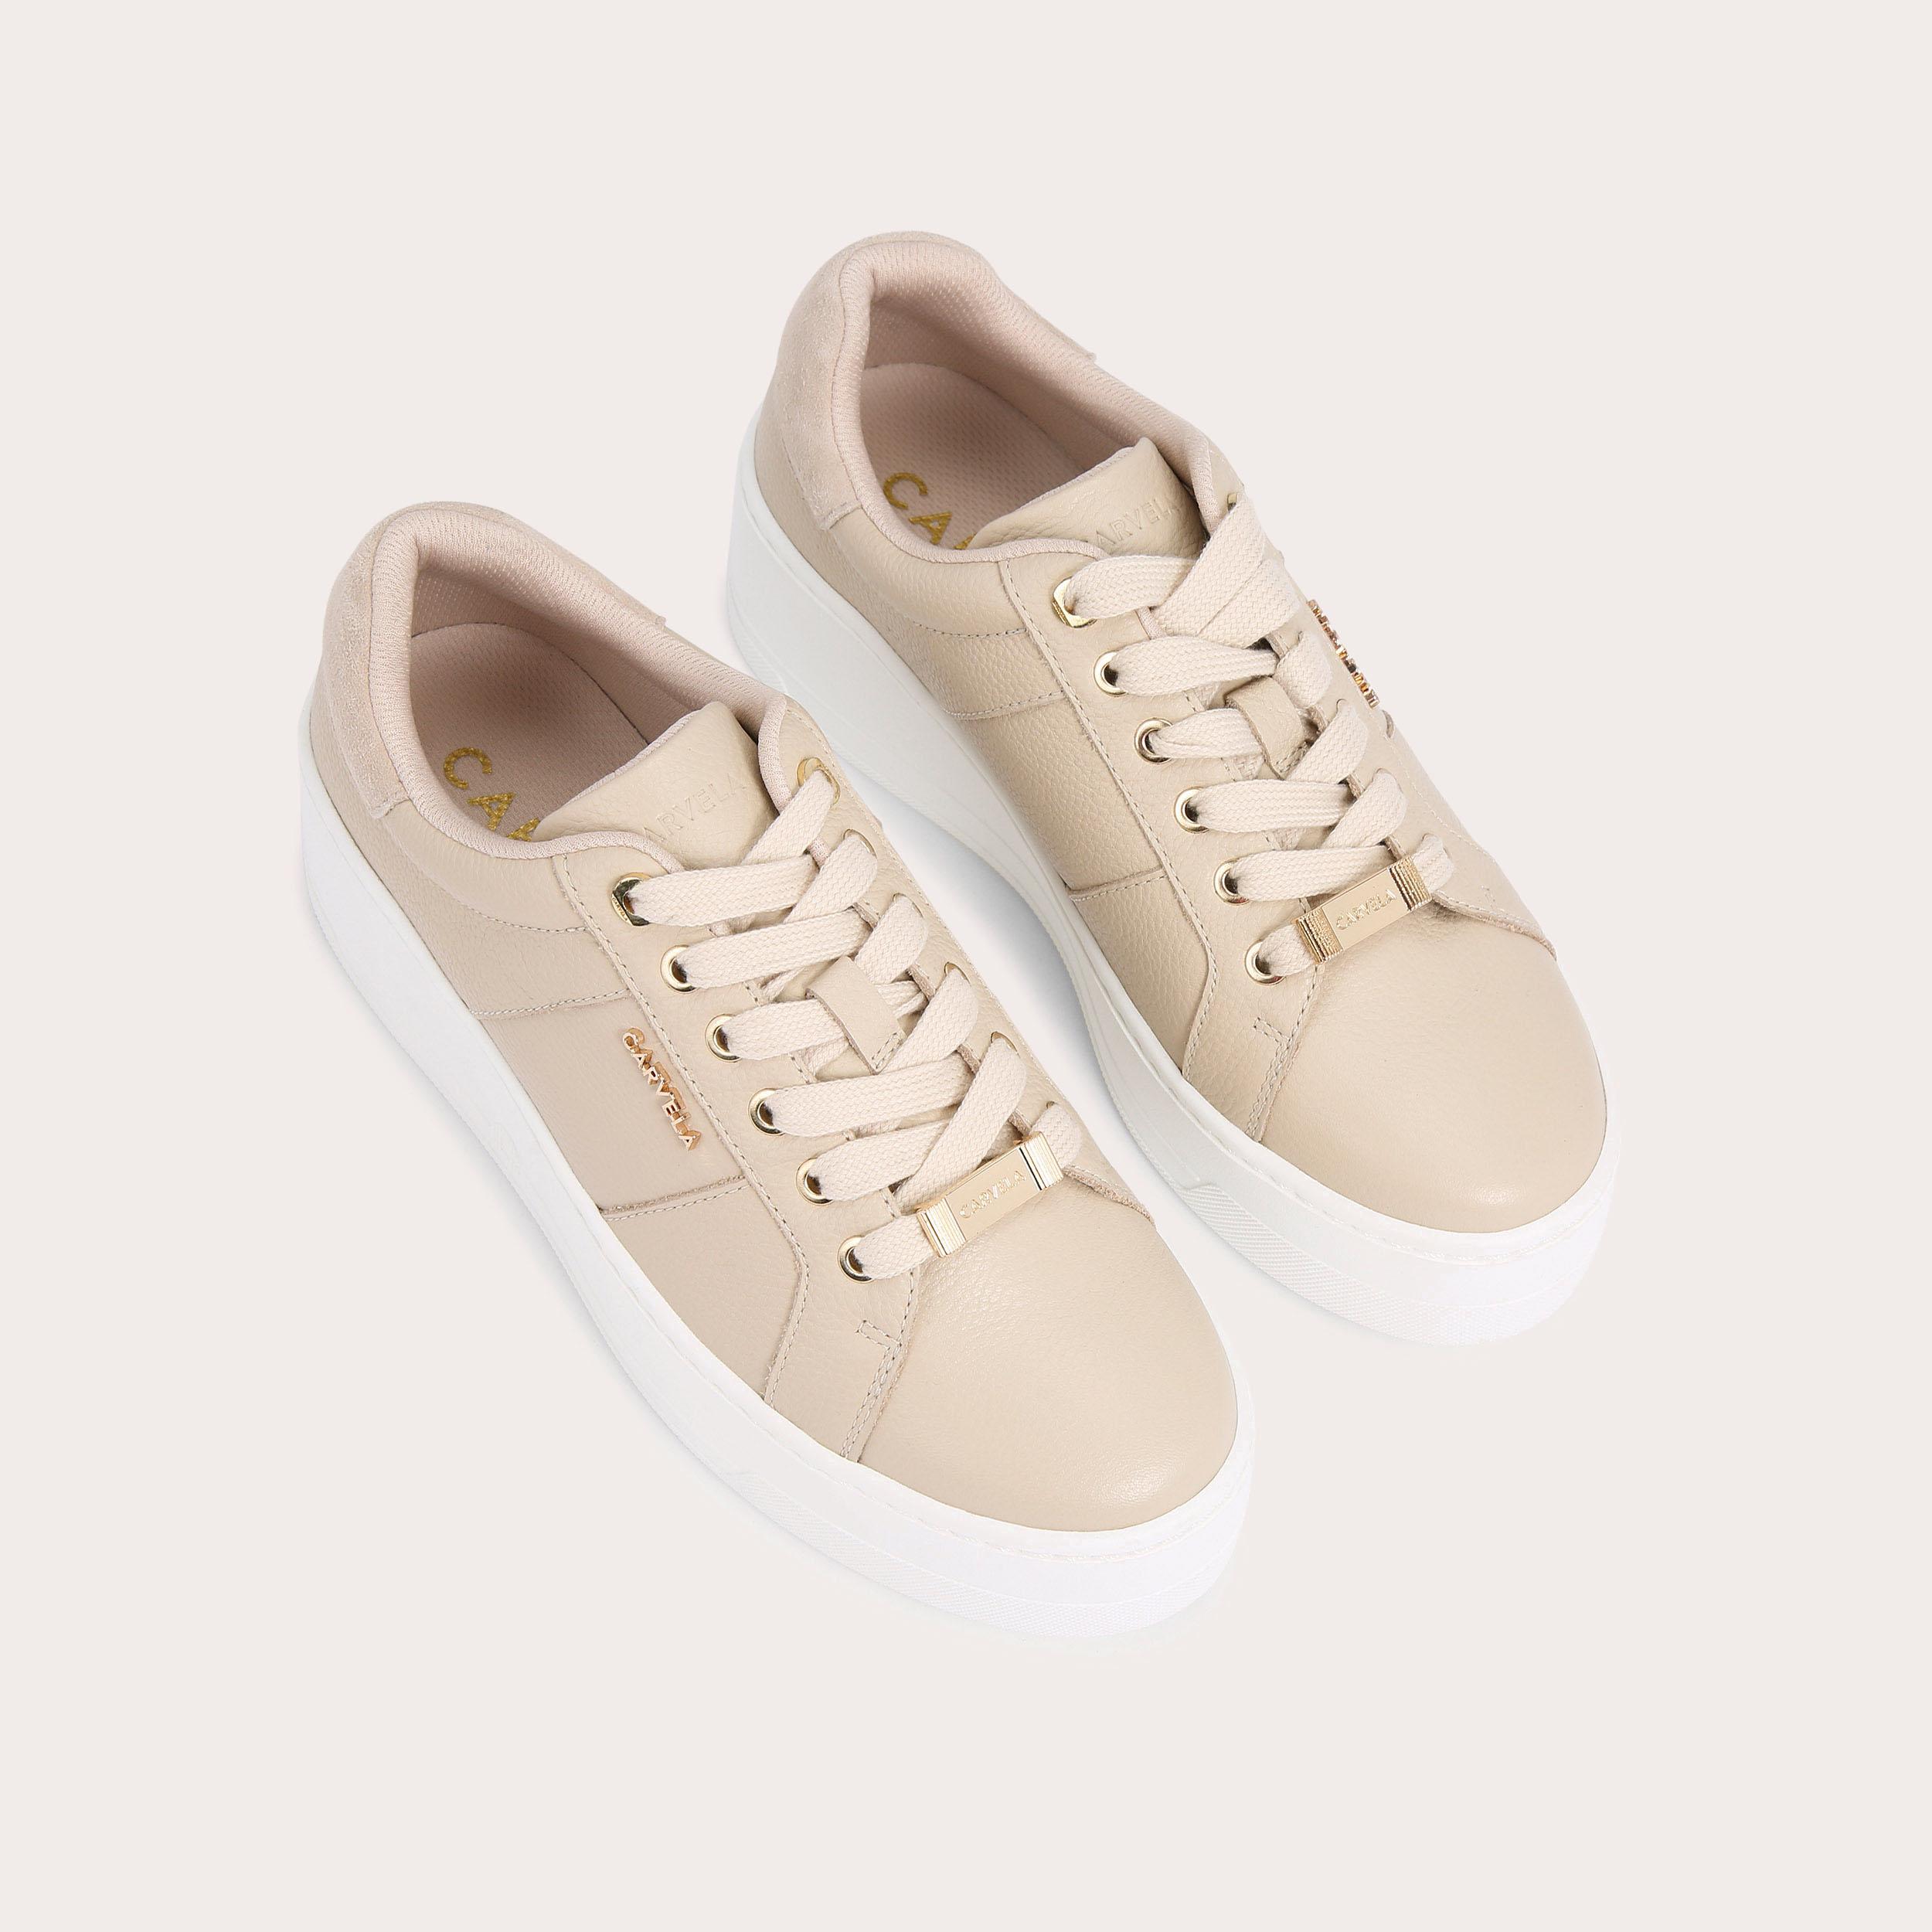 CONNECTED Beige Trainers by CARVELA